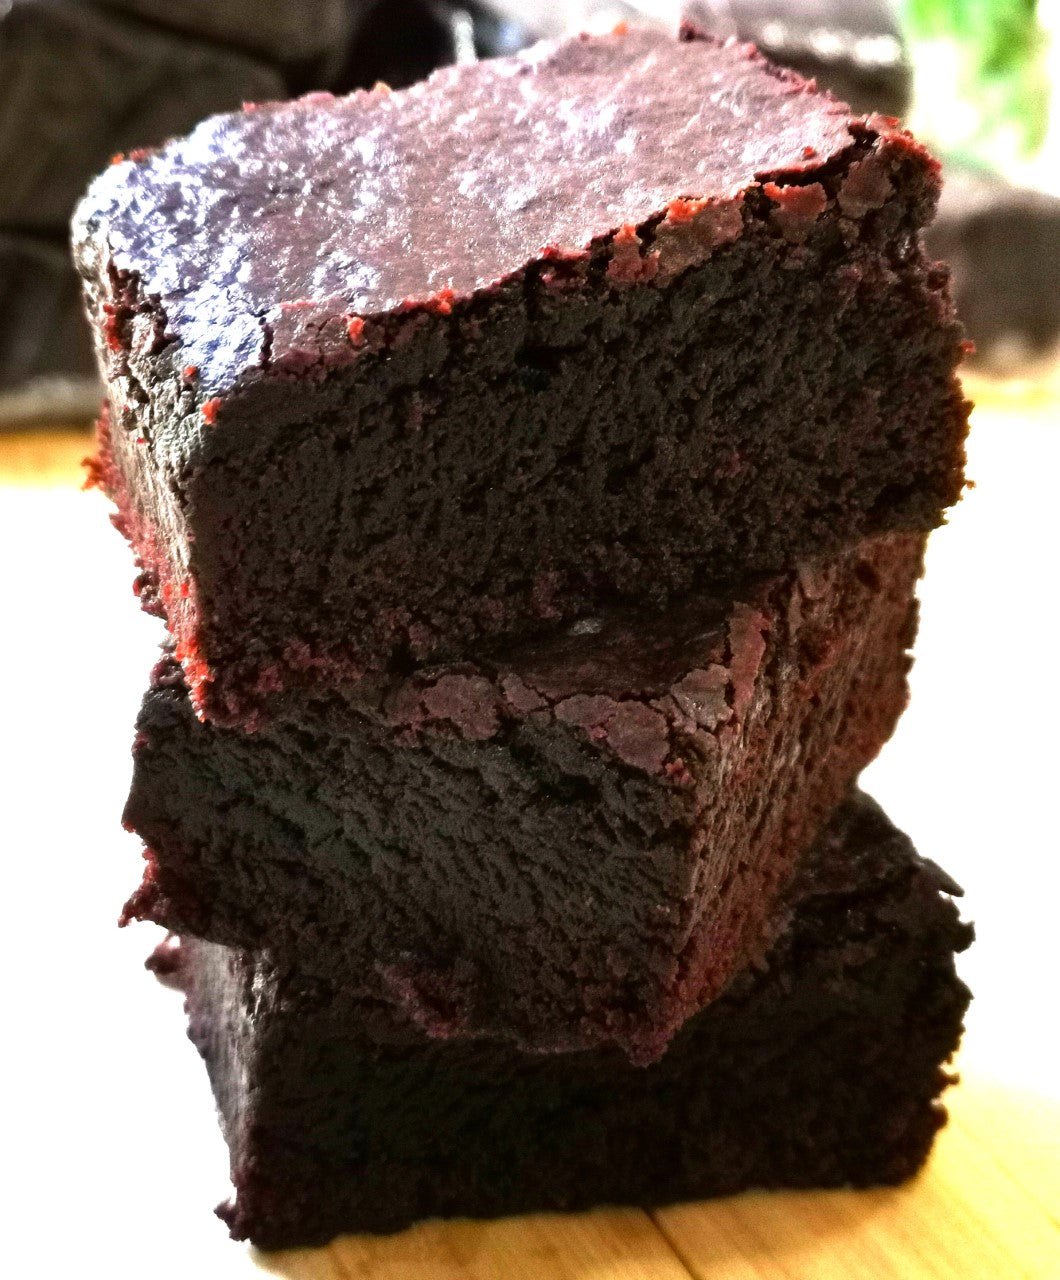 Three Killer Chocolate Brownies stacked on top of each other, prepped and delivered by Fierce Fuel in Squamish.